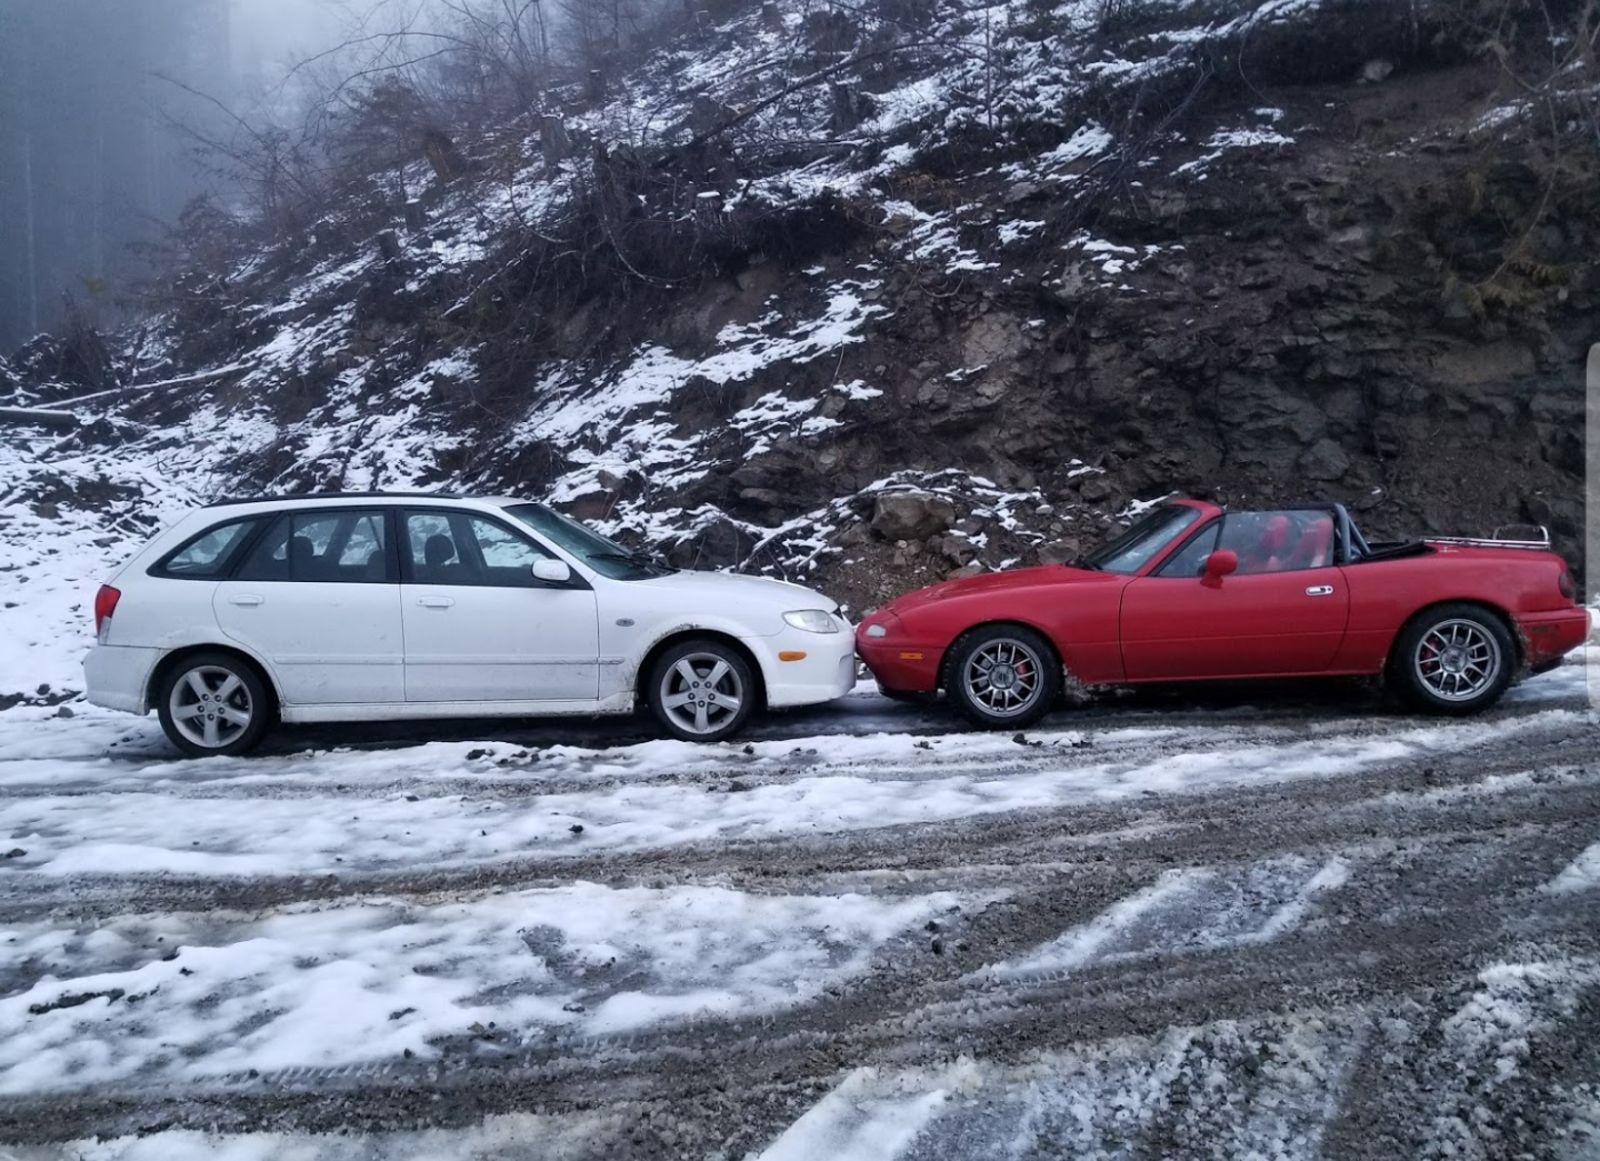 Brought a friend to drift mountain. Our Mazdas got along quite well. However, just minutes after this photo was taken... 